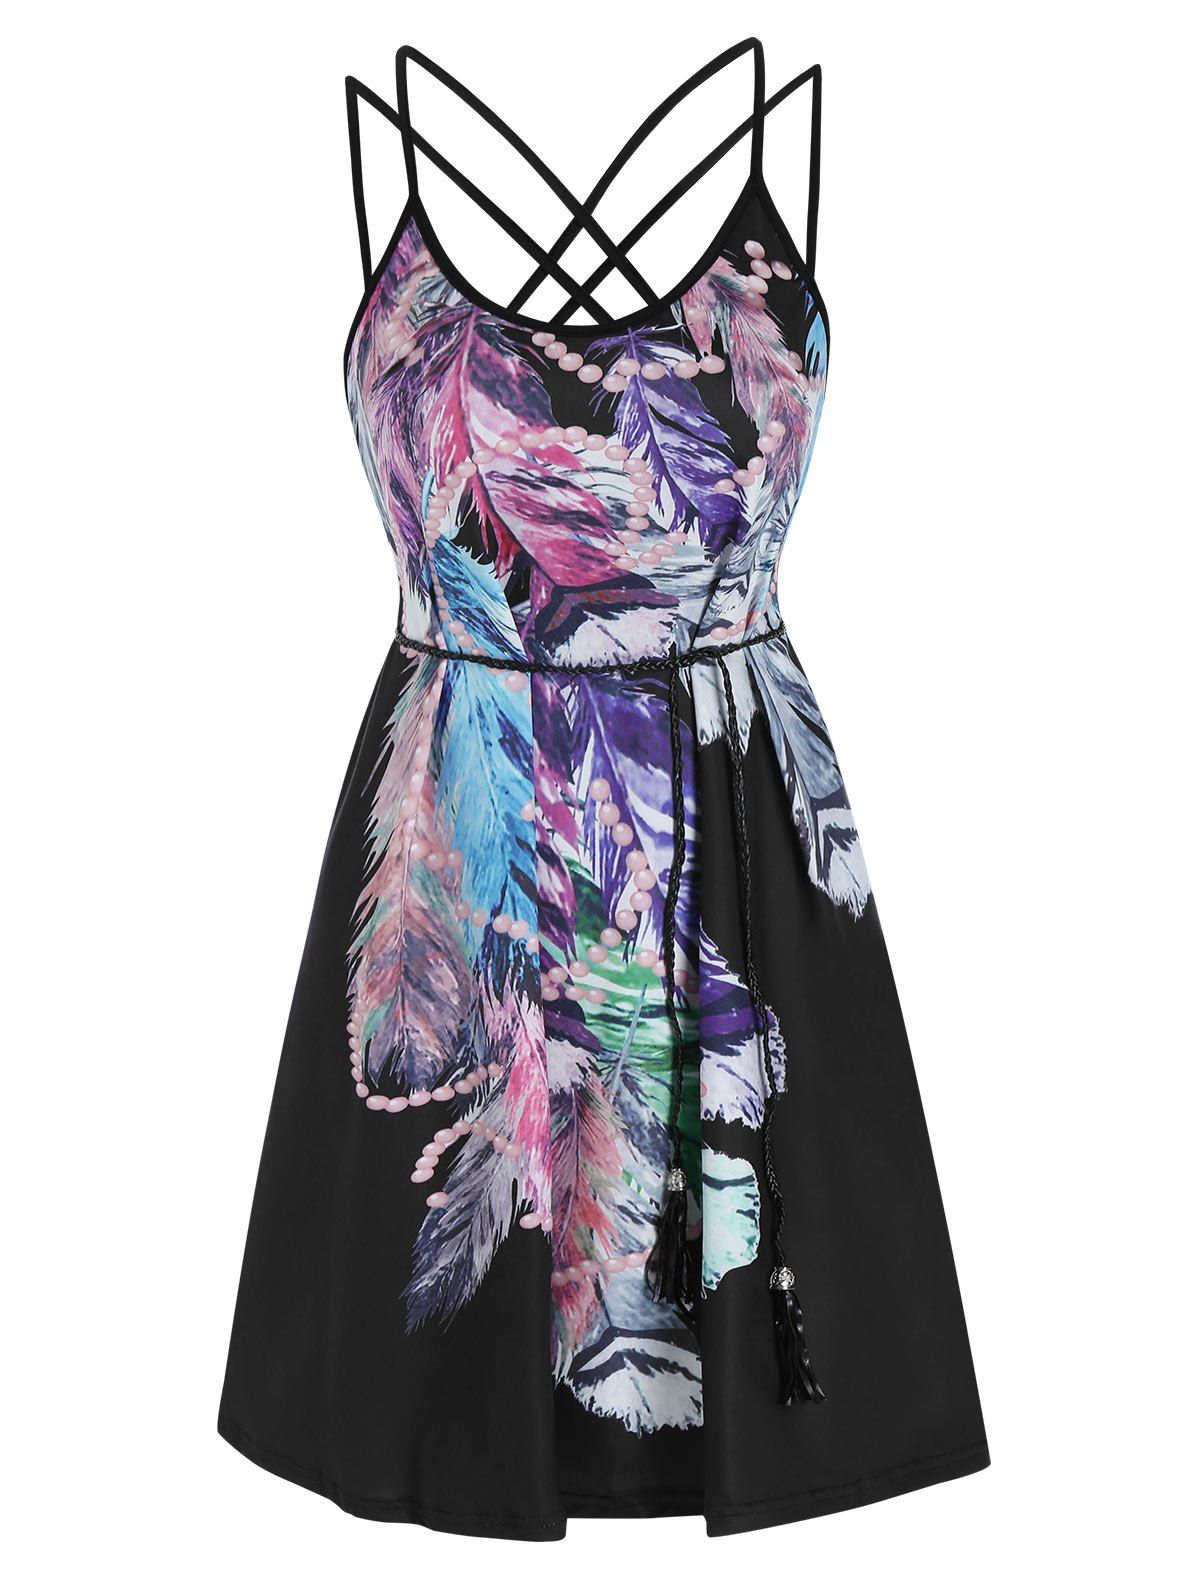 Feather Print Strappy Belted Dress - BLACK M